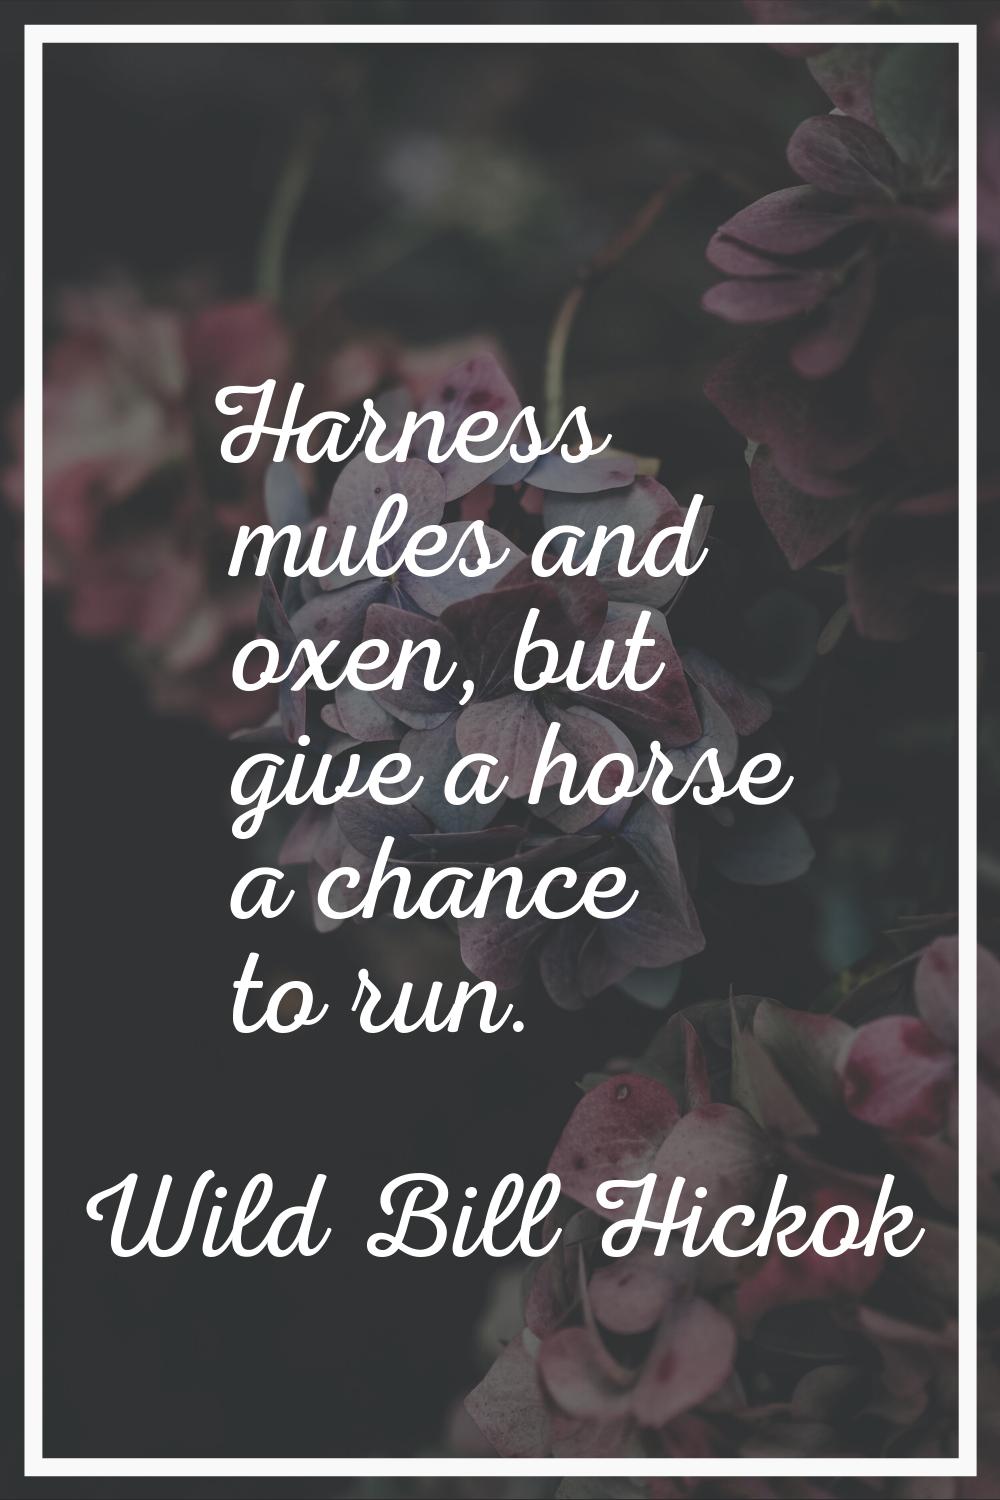 Harness mules and oxen, but give a horse a chance to run.